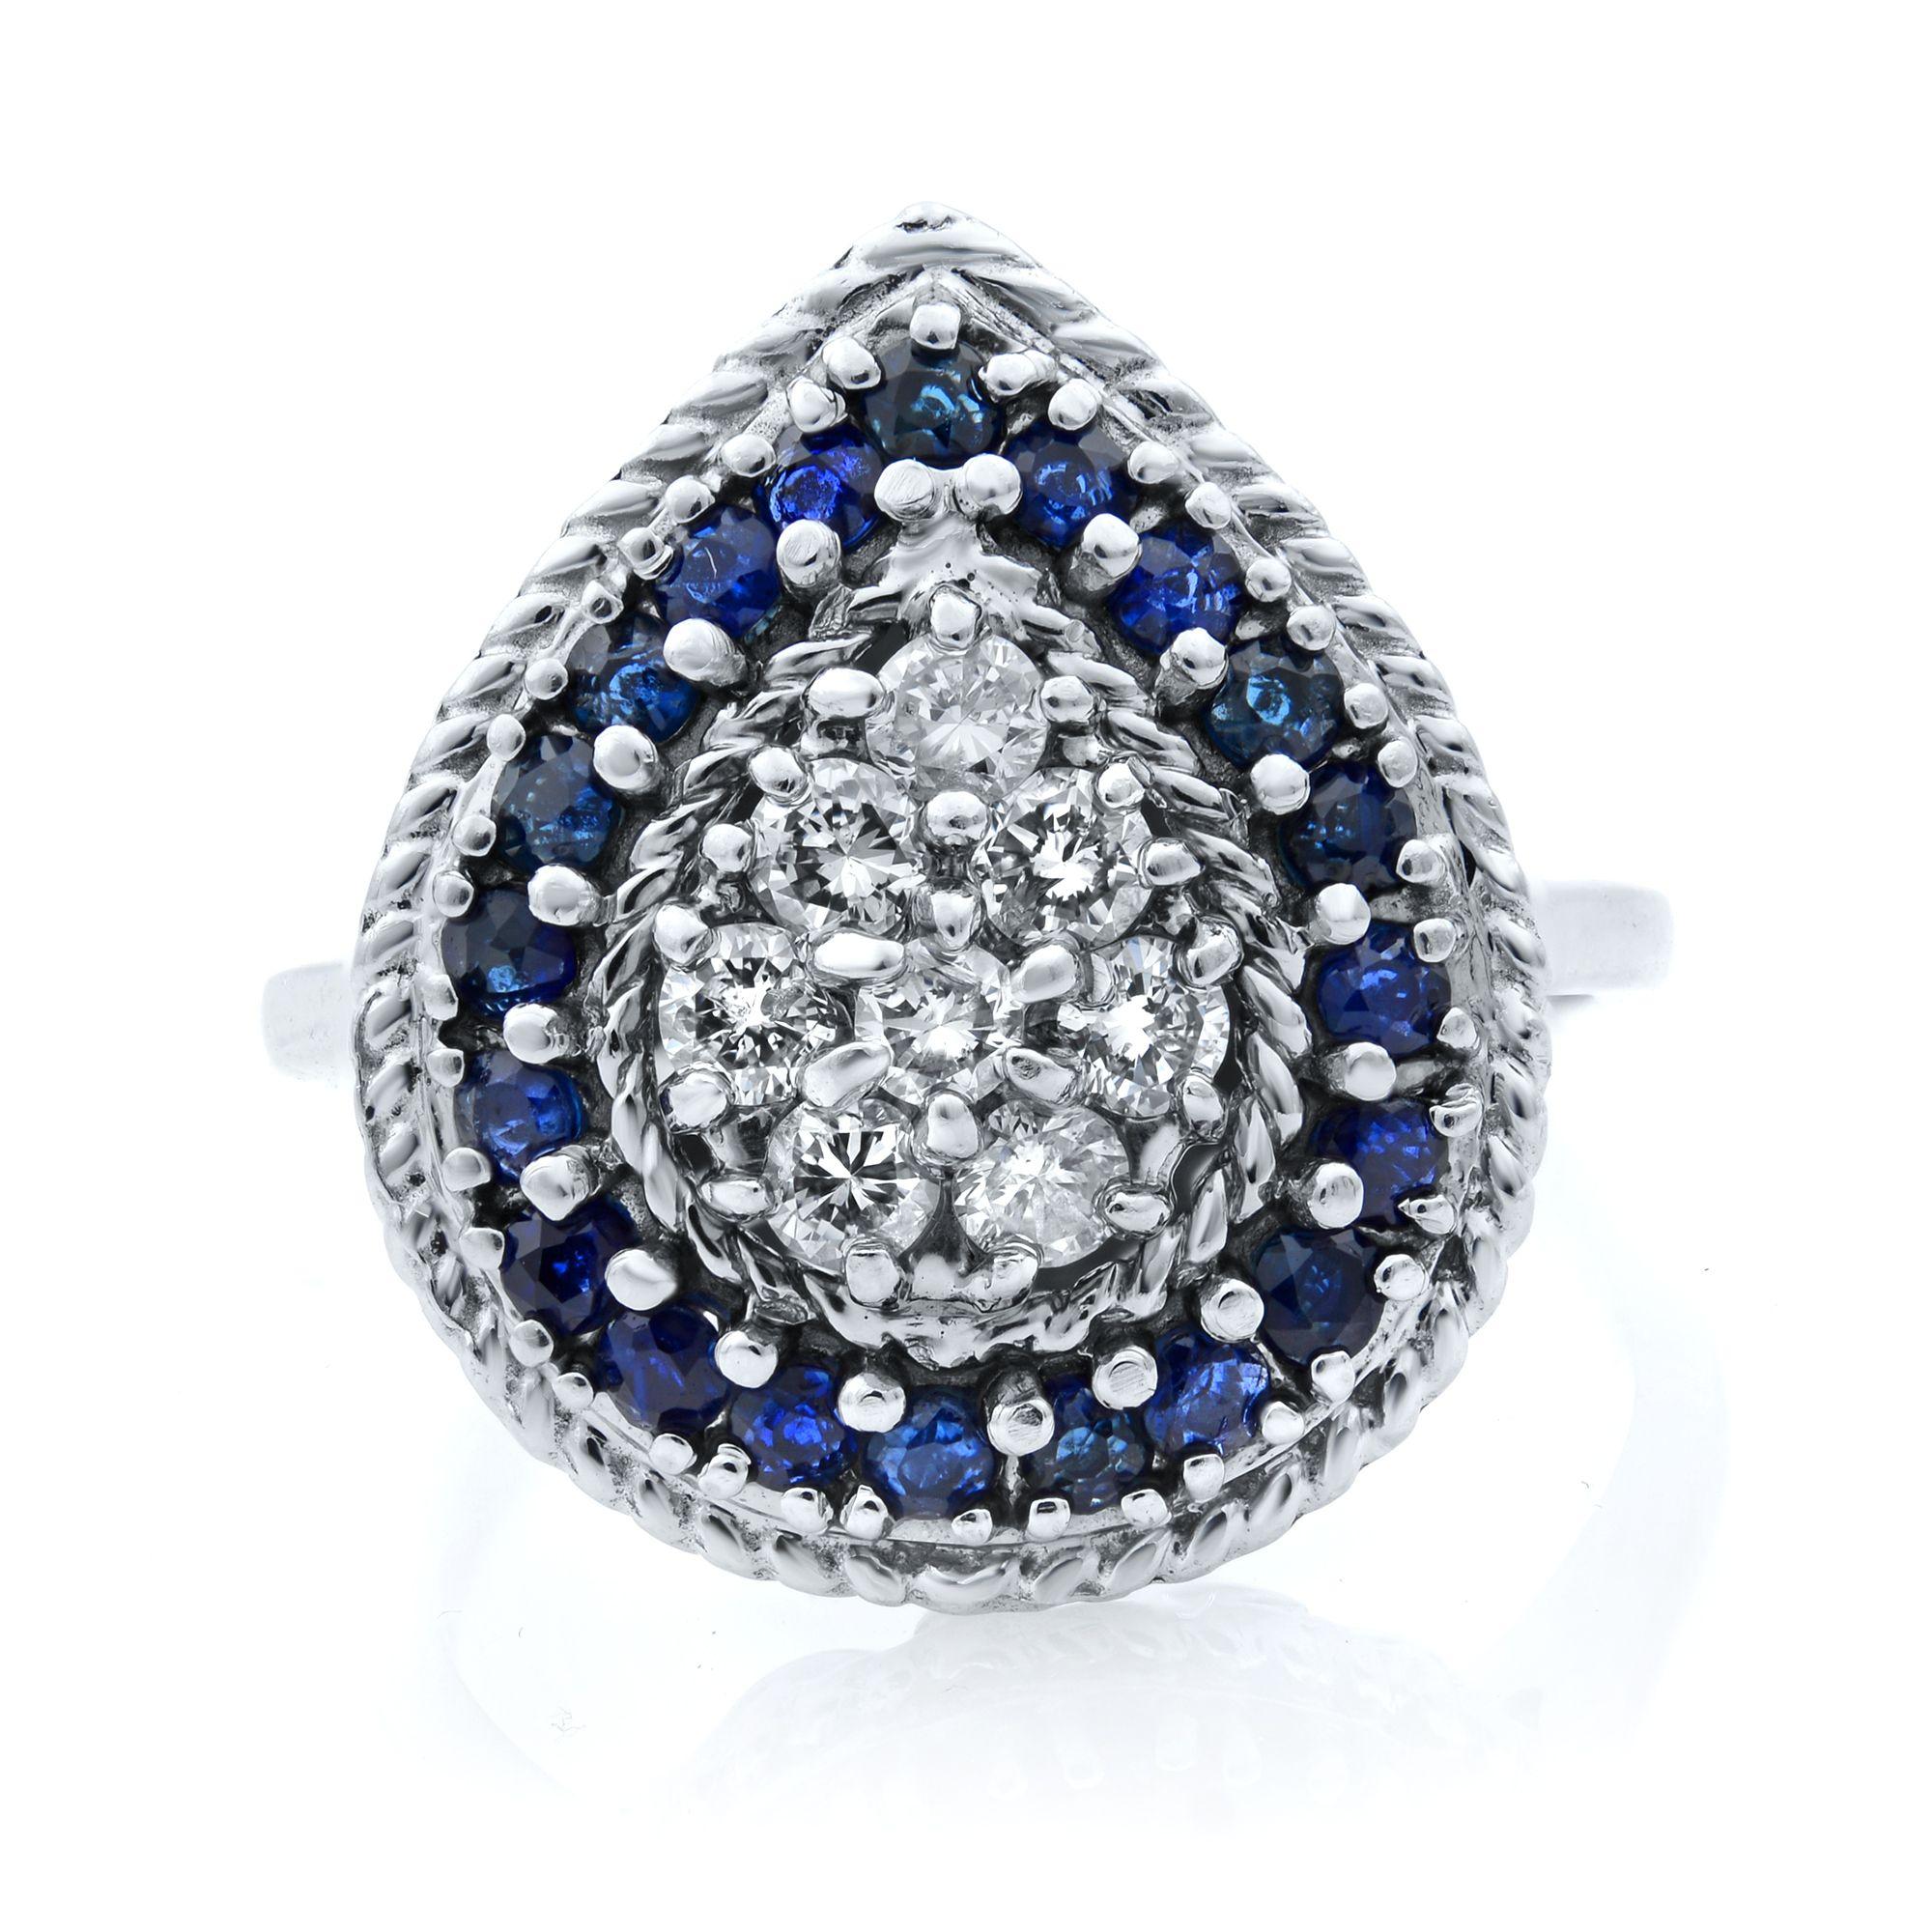 A truly remarkable cocktail ring for the woman who's anything but ordinary. A pear-shaped center is set with 0.32cttw sparkly white diamonds which is the gorgeous focal point. Halo is set with 0.30cttw of natural sapphires. This ring is crafted in